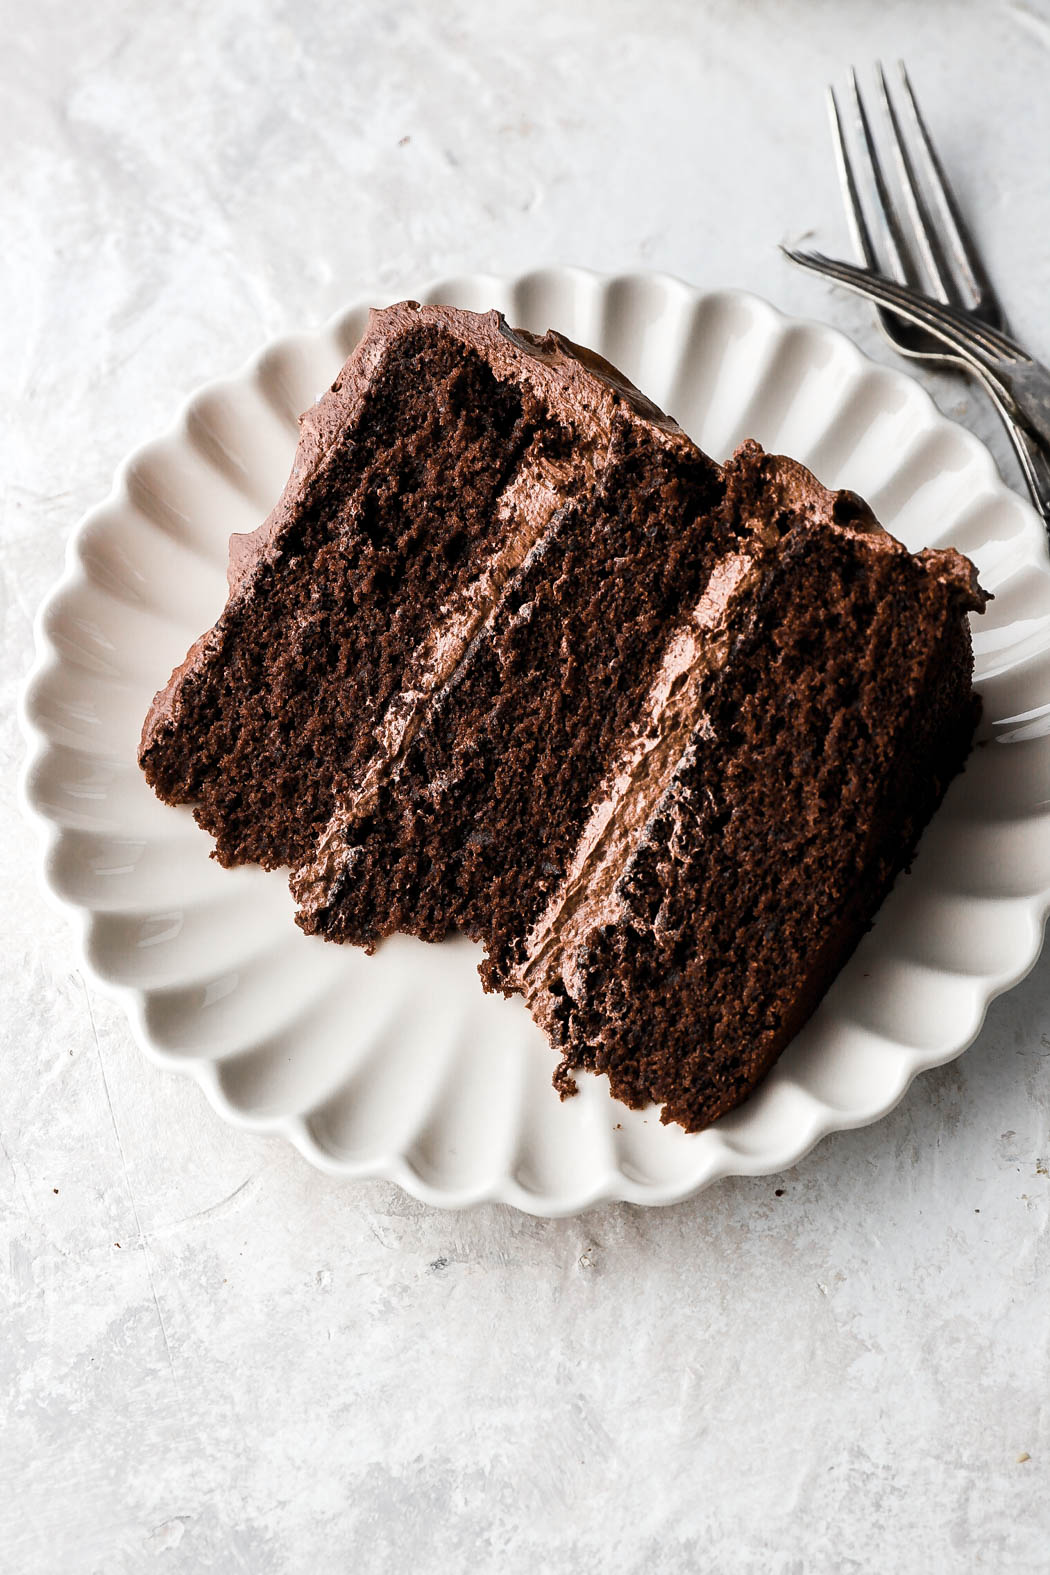 slice of chocolate cake with chocolate frosting